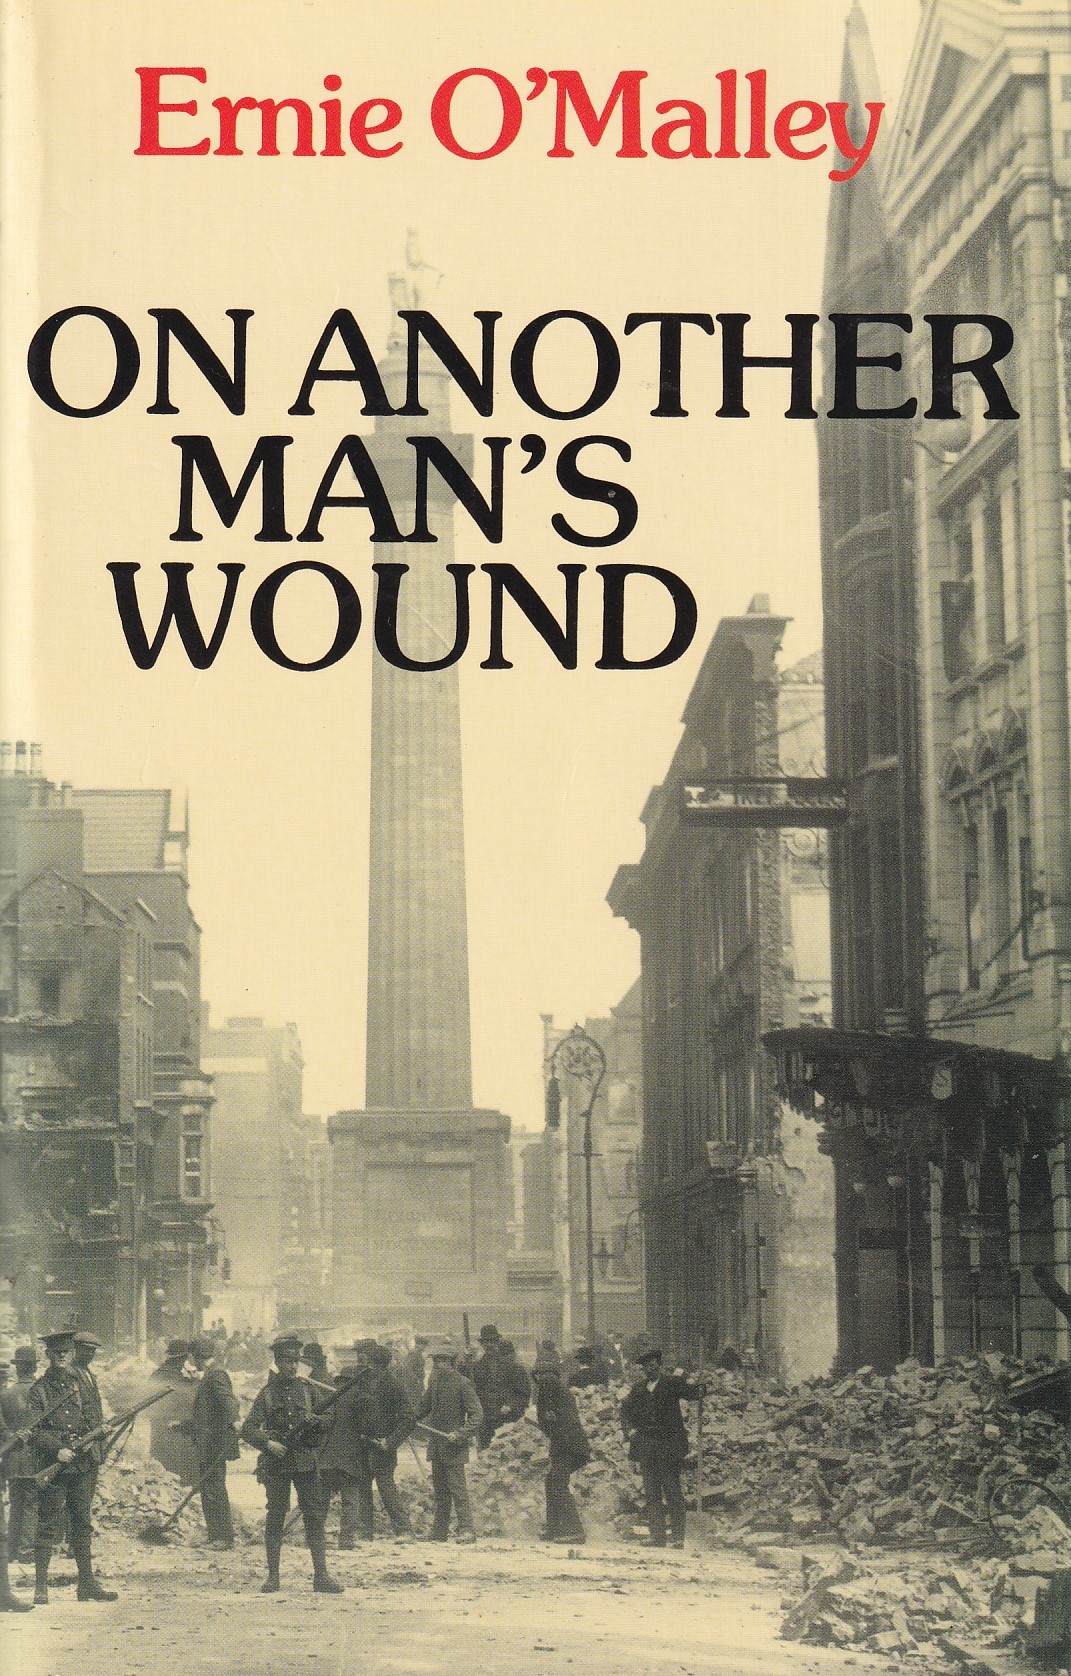 On Another Man’s Wound by Ernie O'Malley